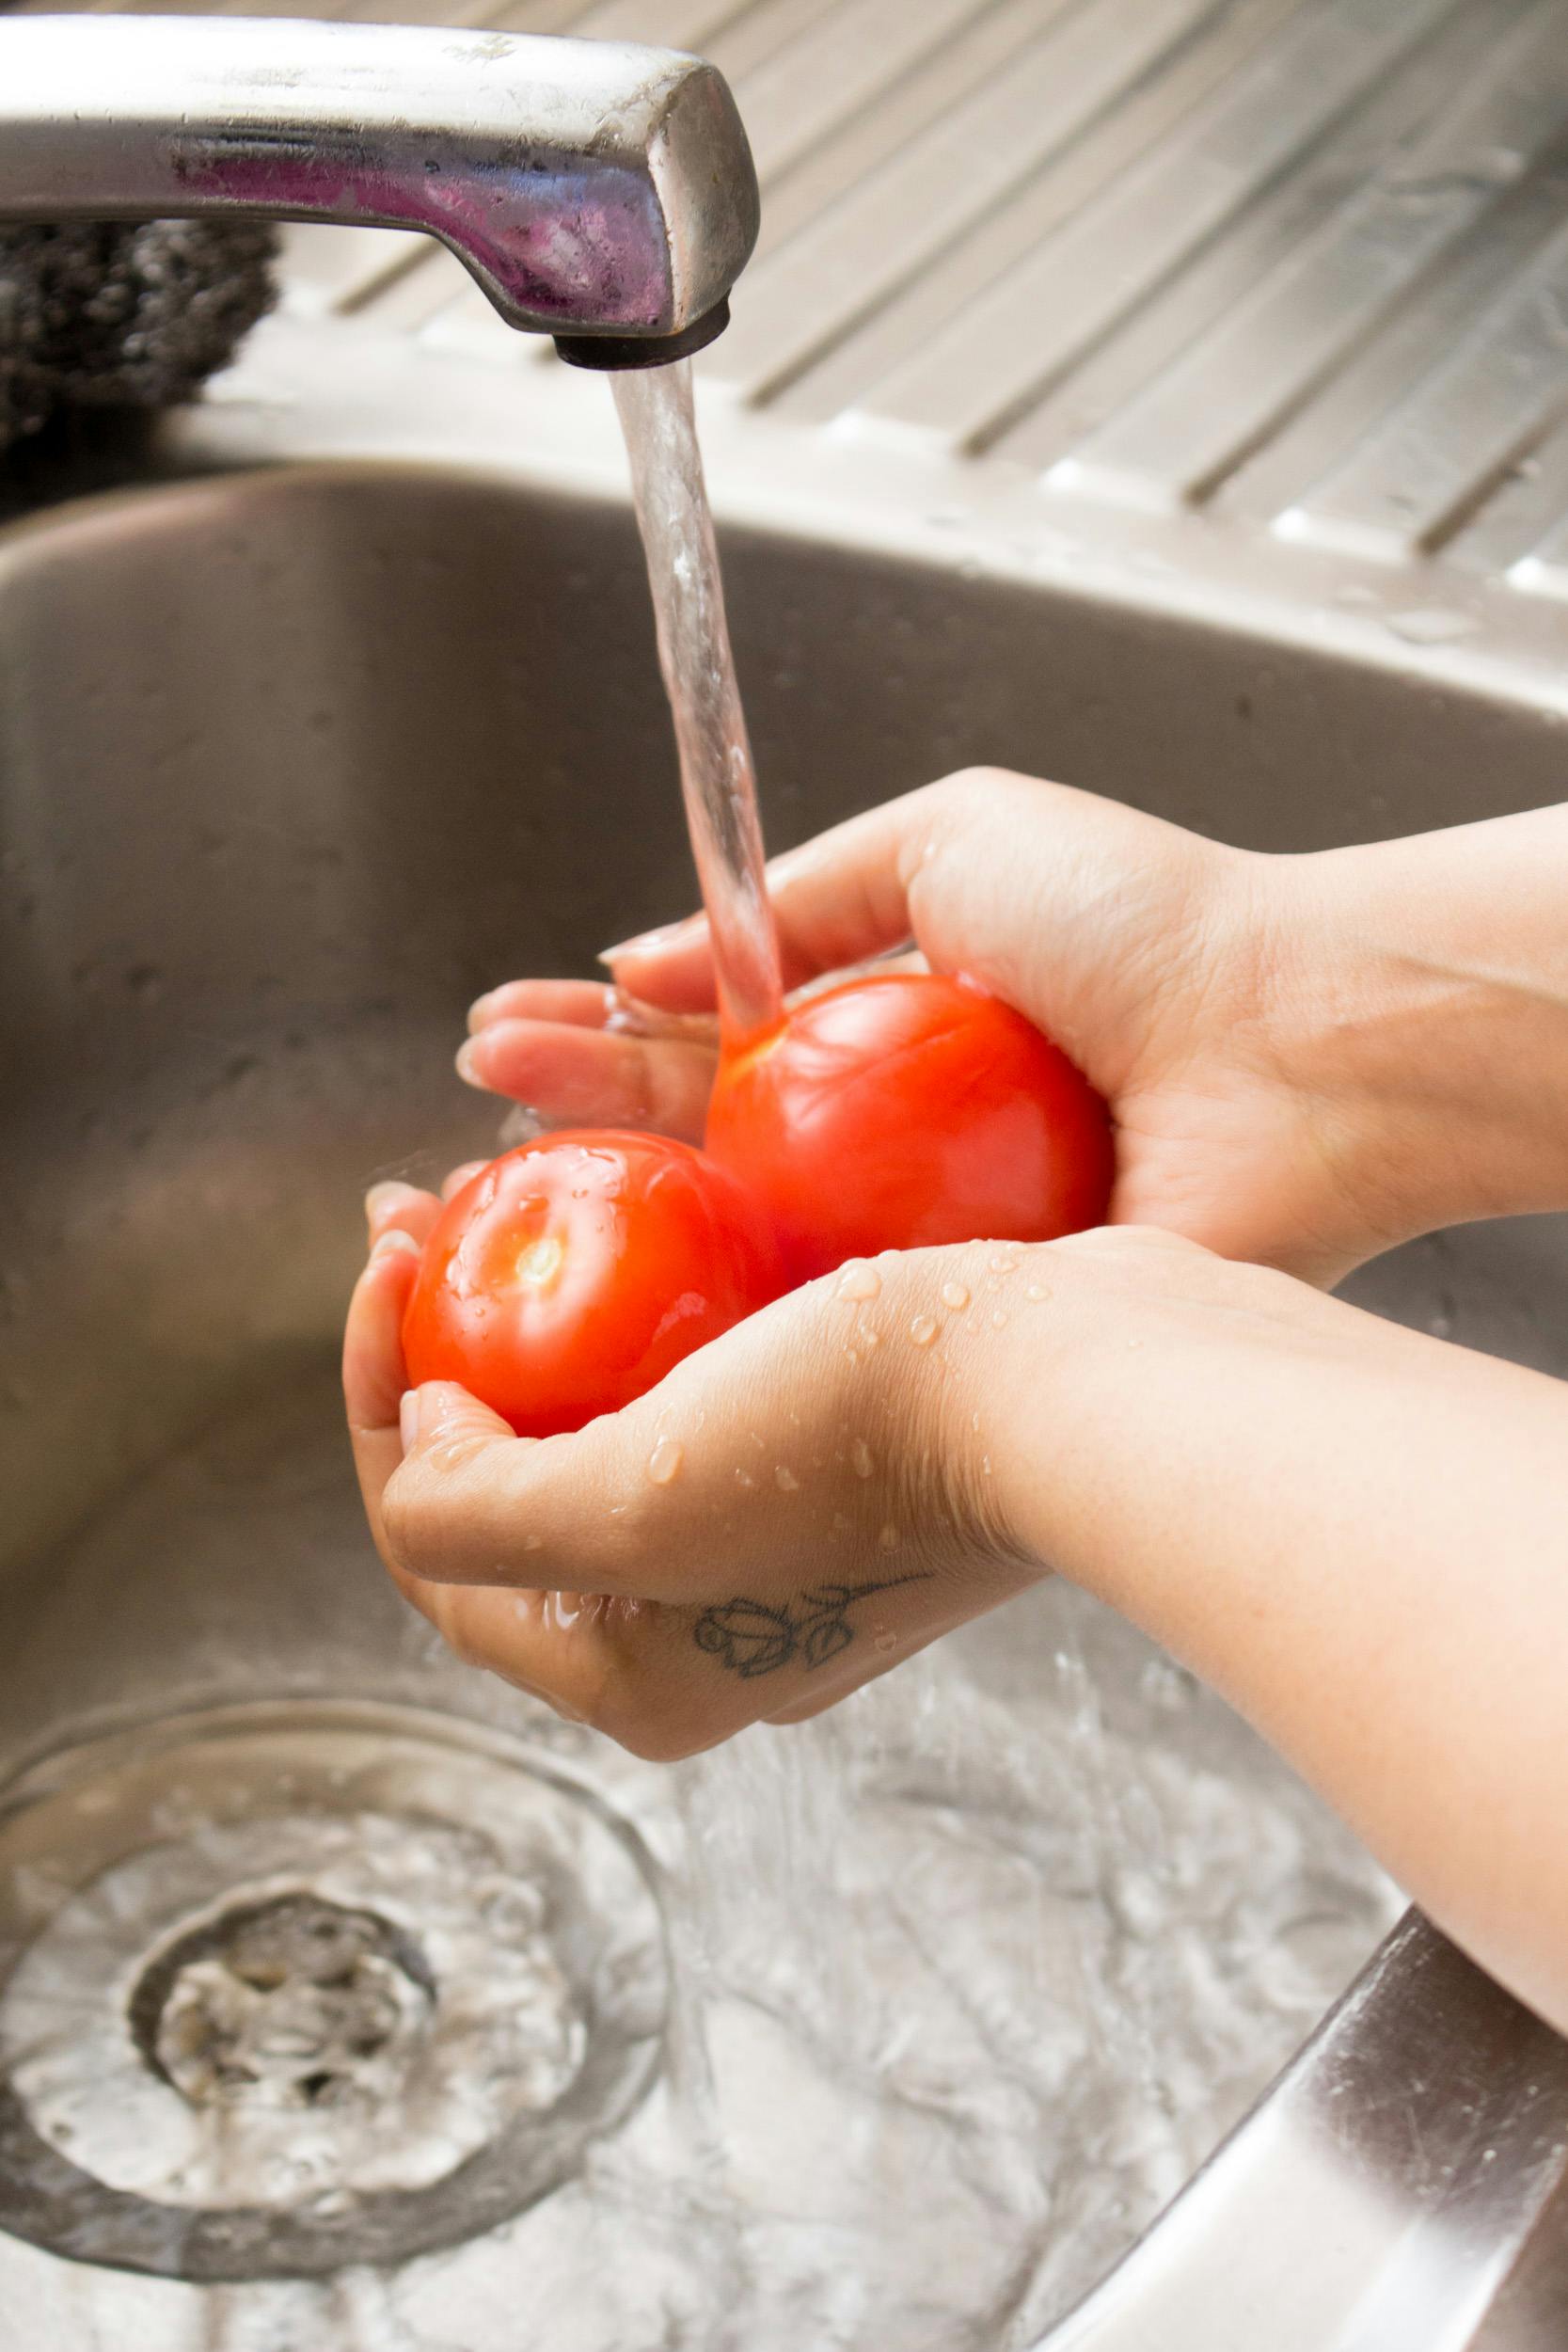 Free stock photo of food prep, hands, tomatoes